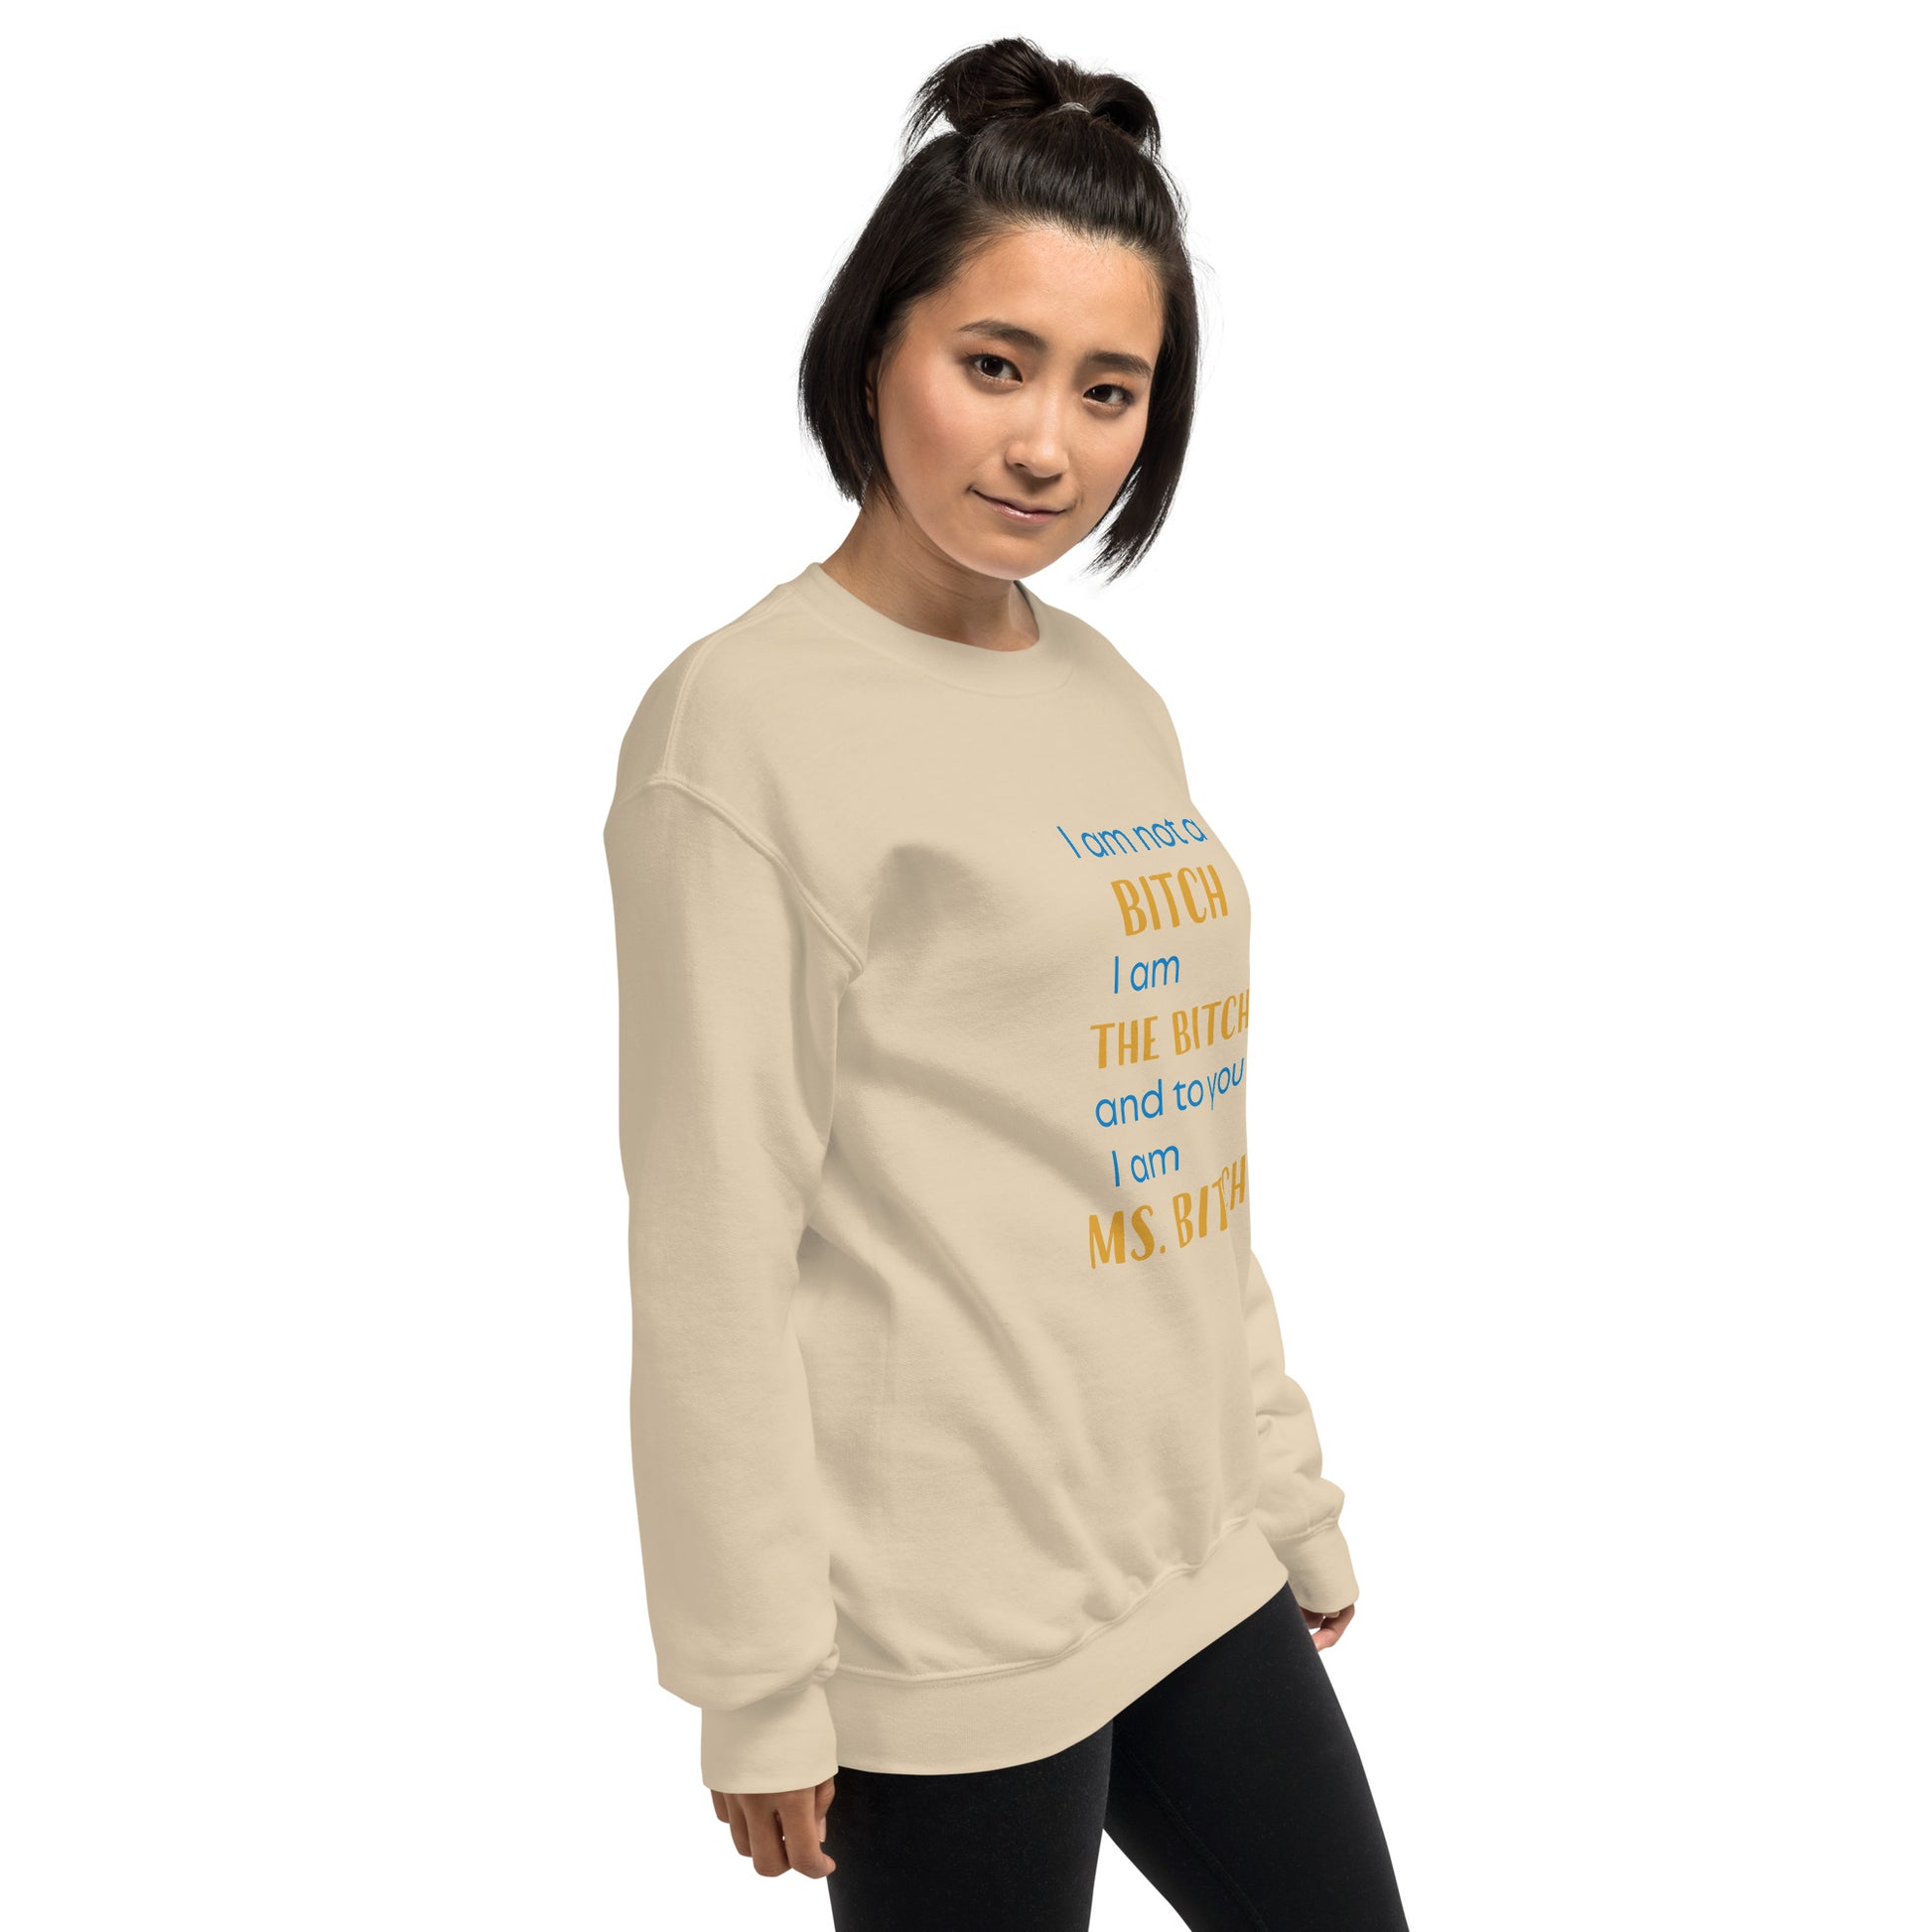 Women with sand sweatshirt with the text "to you I'm MS bitch"